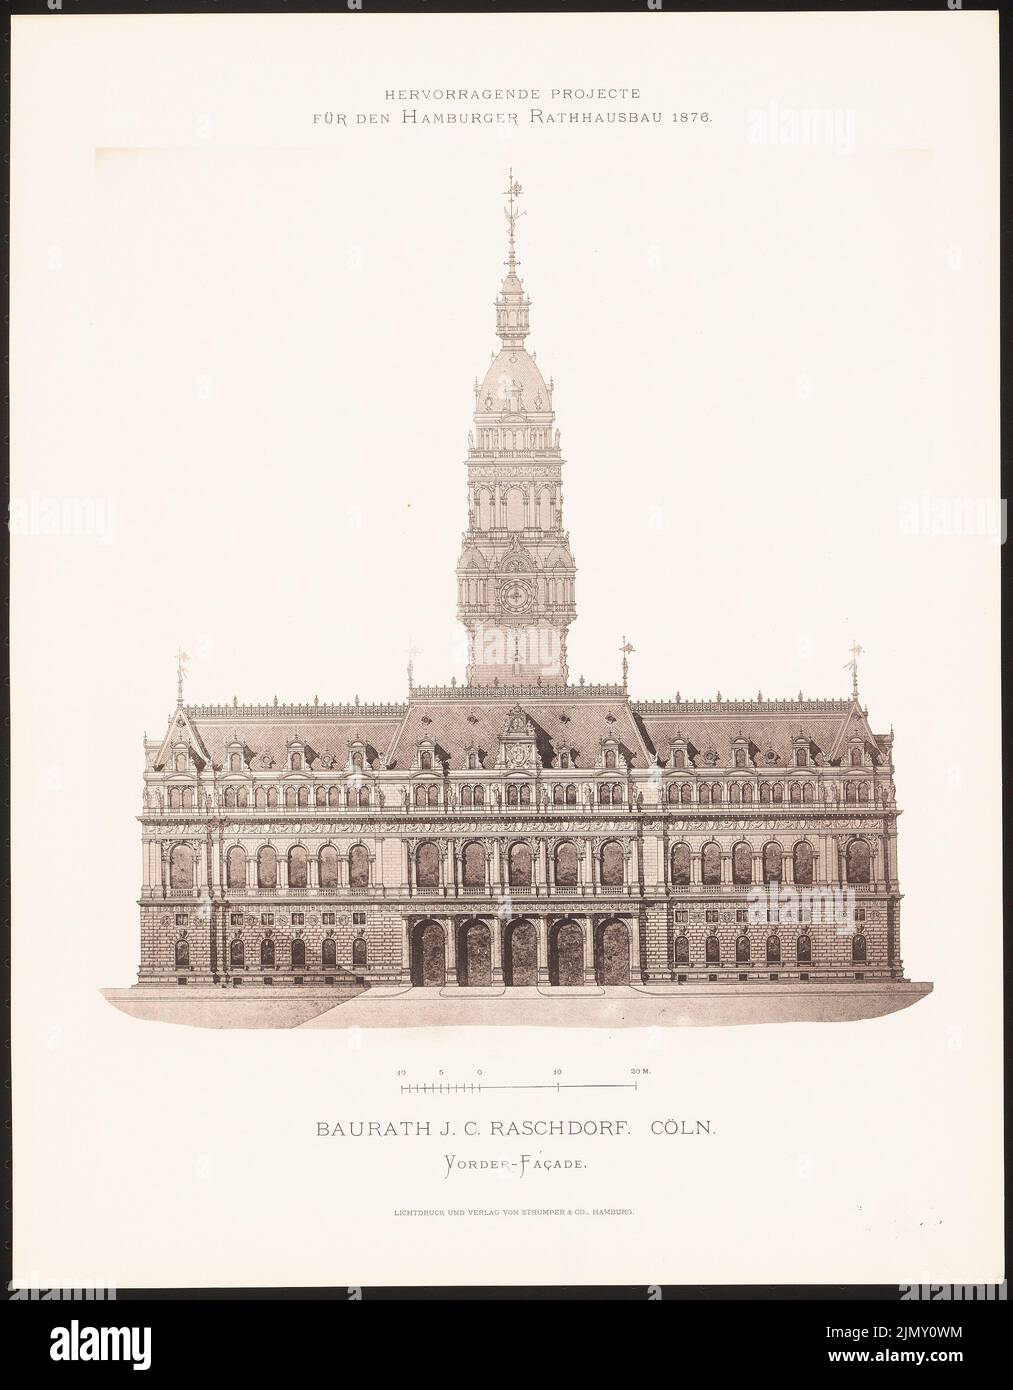 Raschdorff Julius (1823-1914), excellent projects for the Hamburg town hall building in 1876 (1876-1876): View from the front. Light pressure on paper, 45.1 x 35.2 cm (including scan edges) Stock Photo